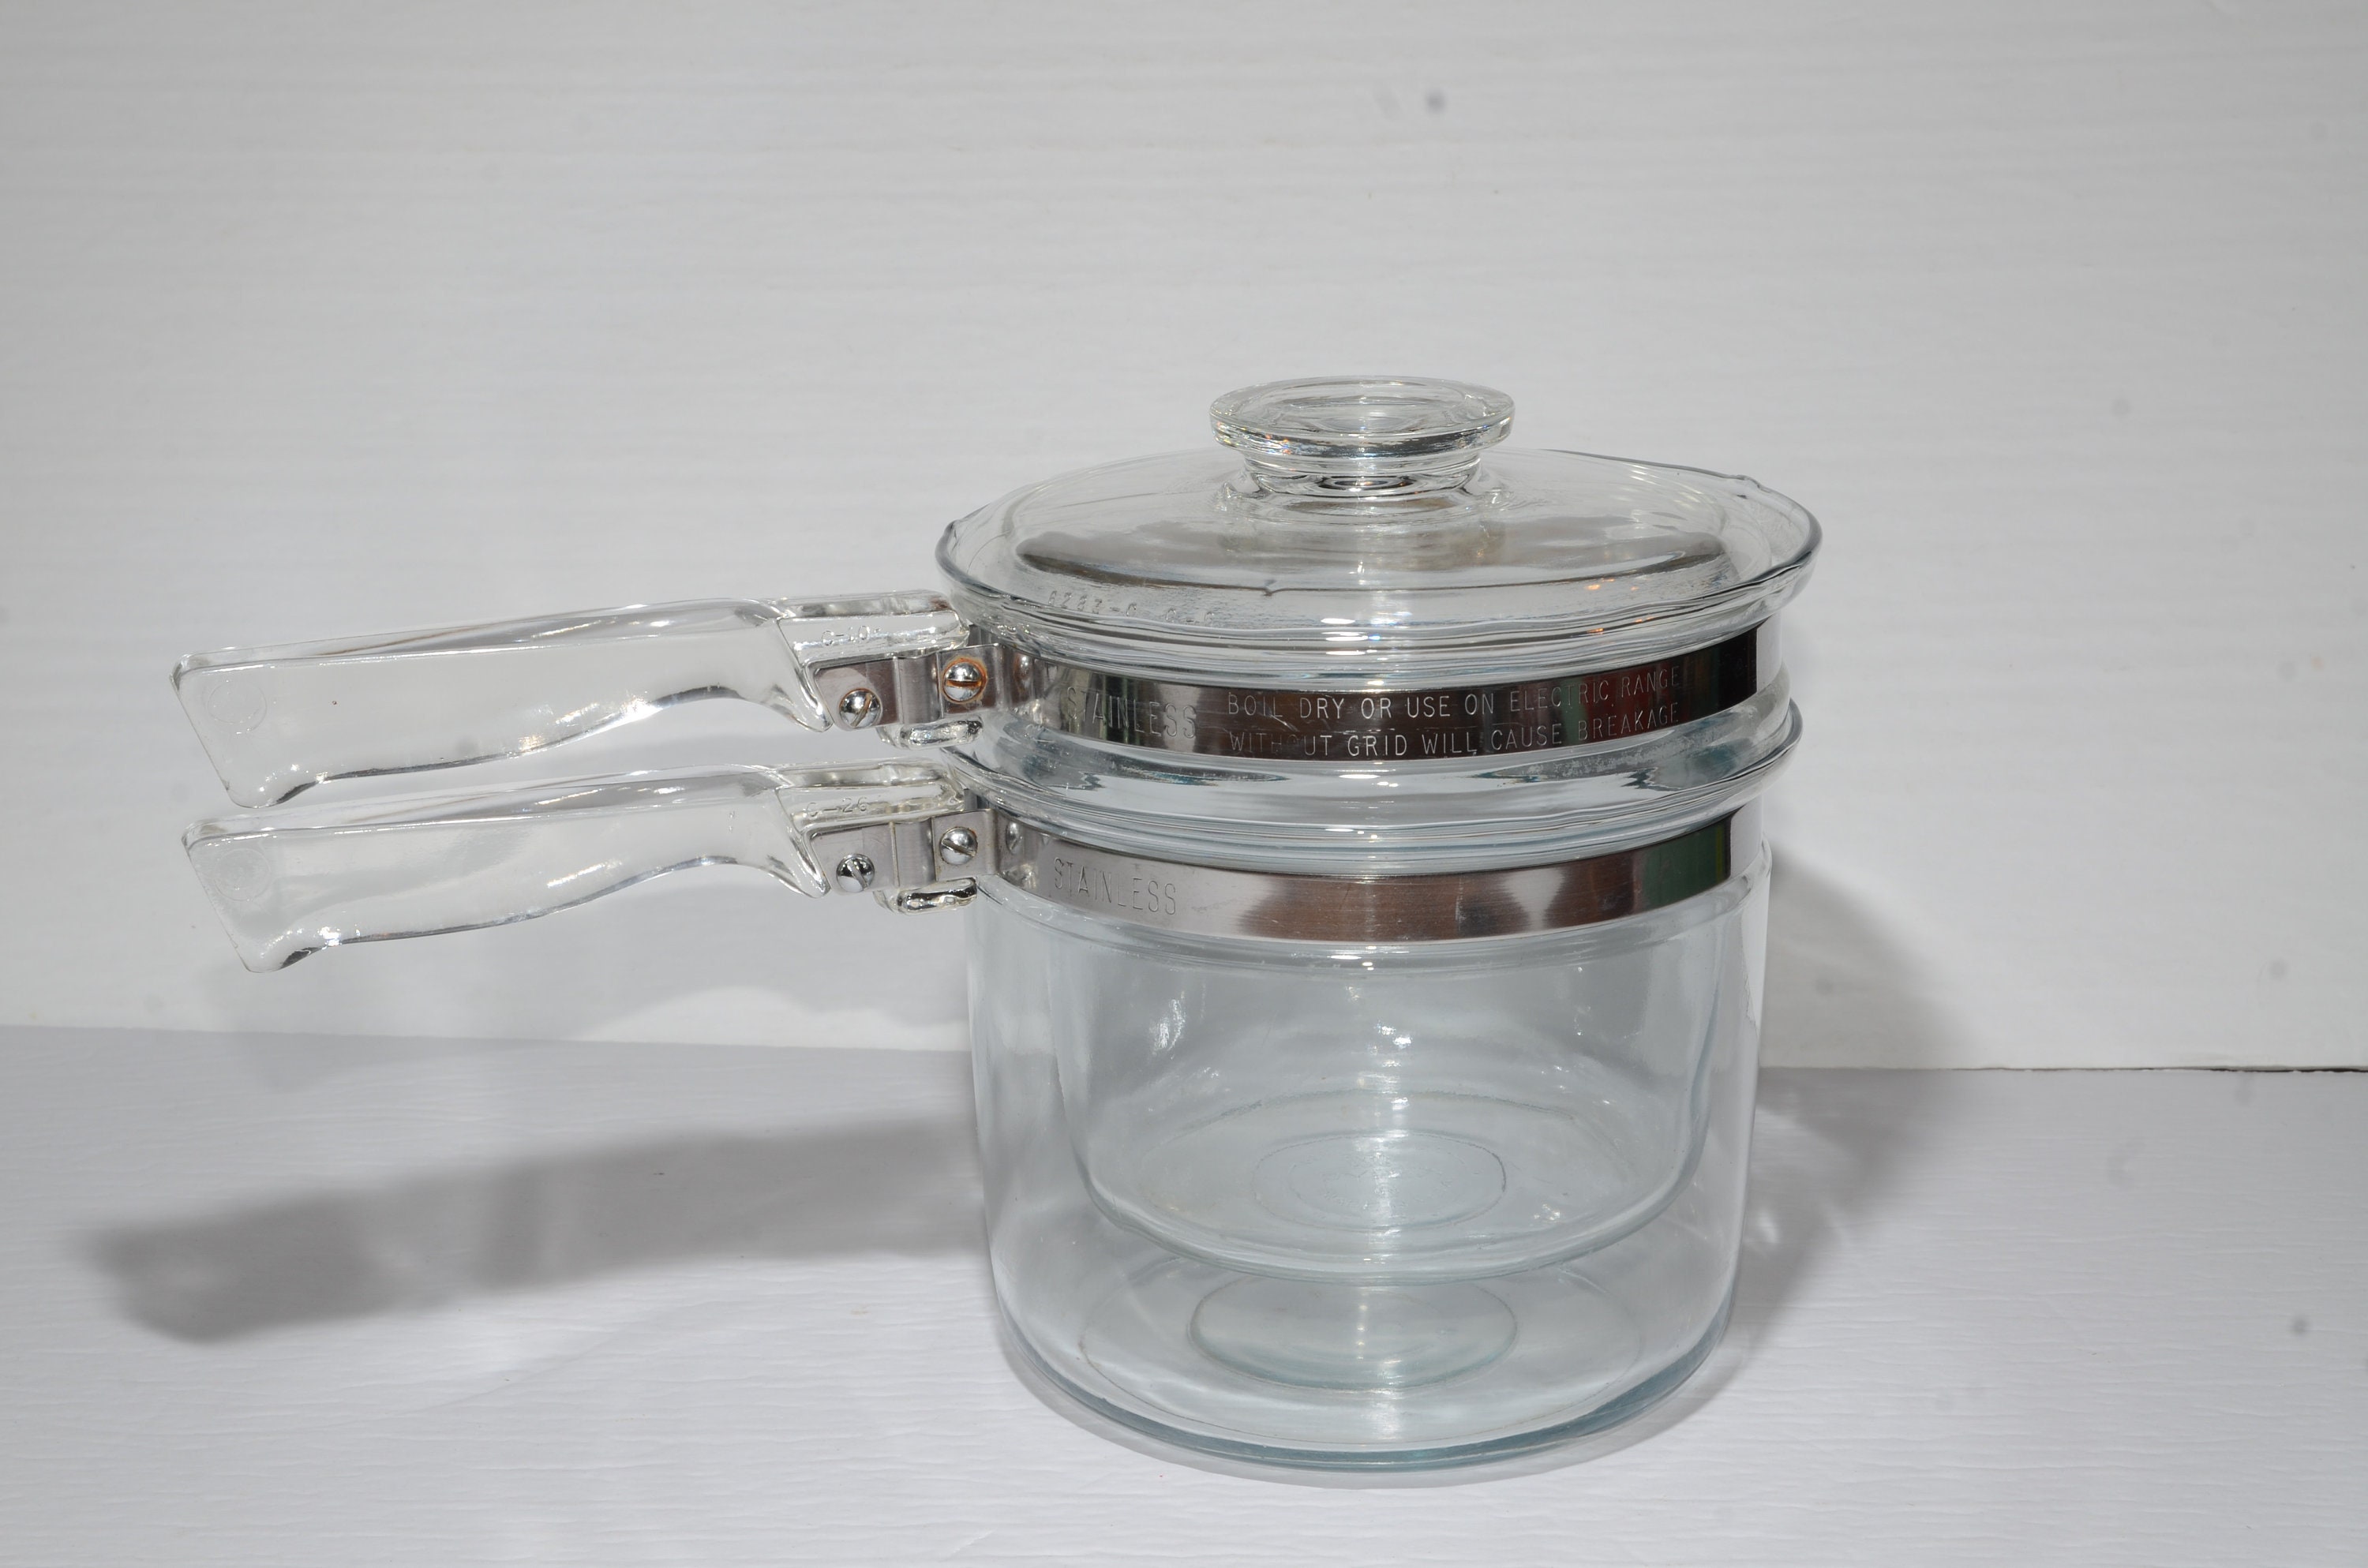 Made in USA Vintage Pyrex Clear Glass Double Boiler Cooking Pot